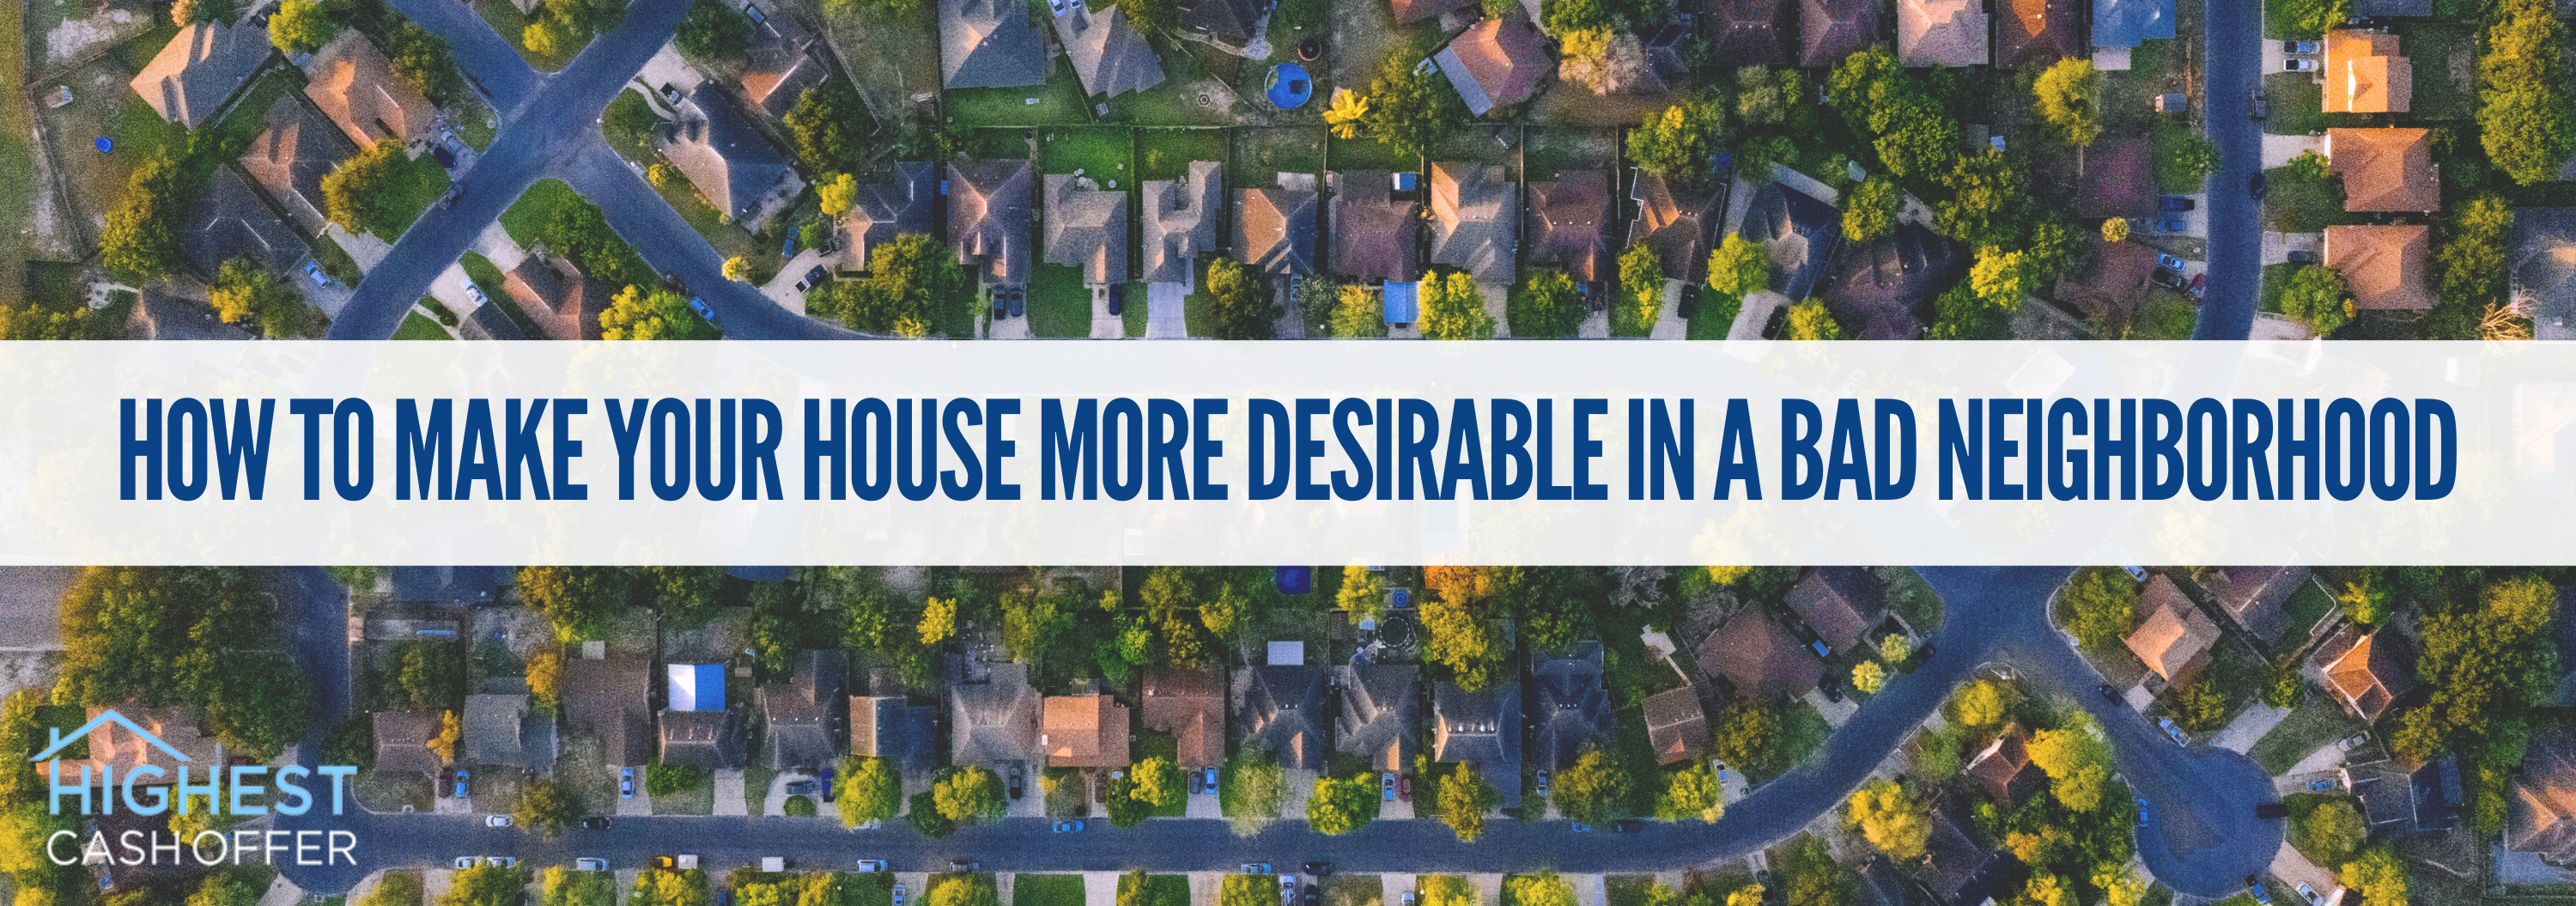 How to Make Your House More Desirable in a Bad Neighborhood